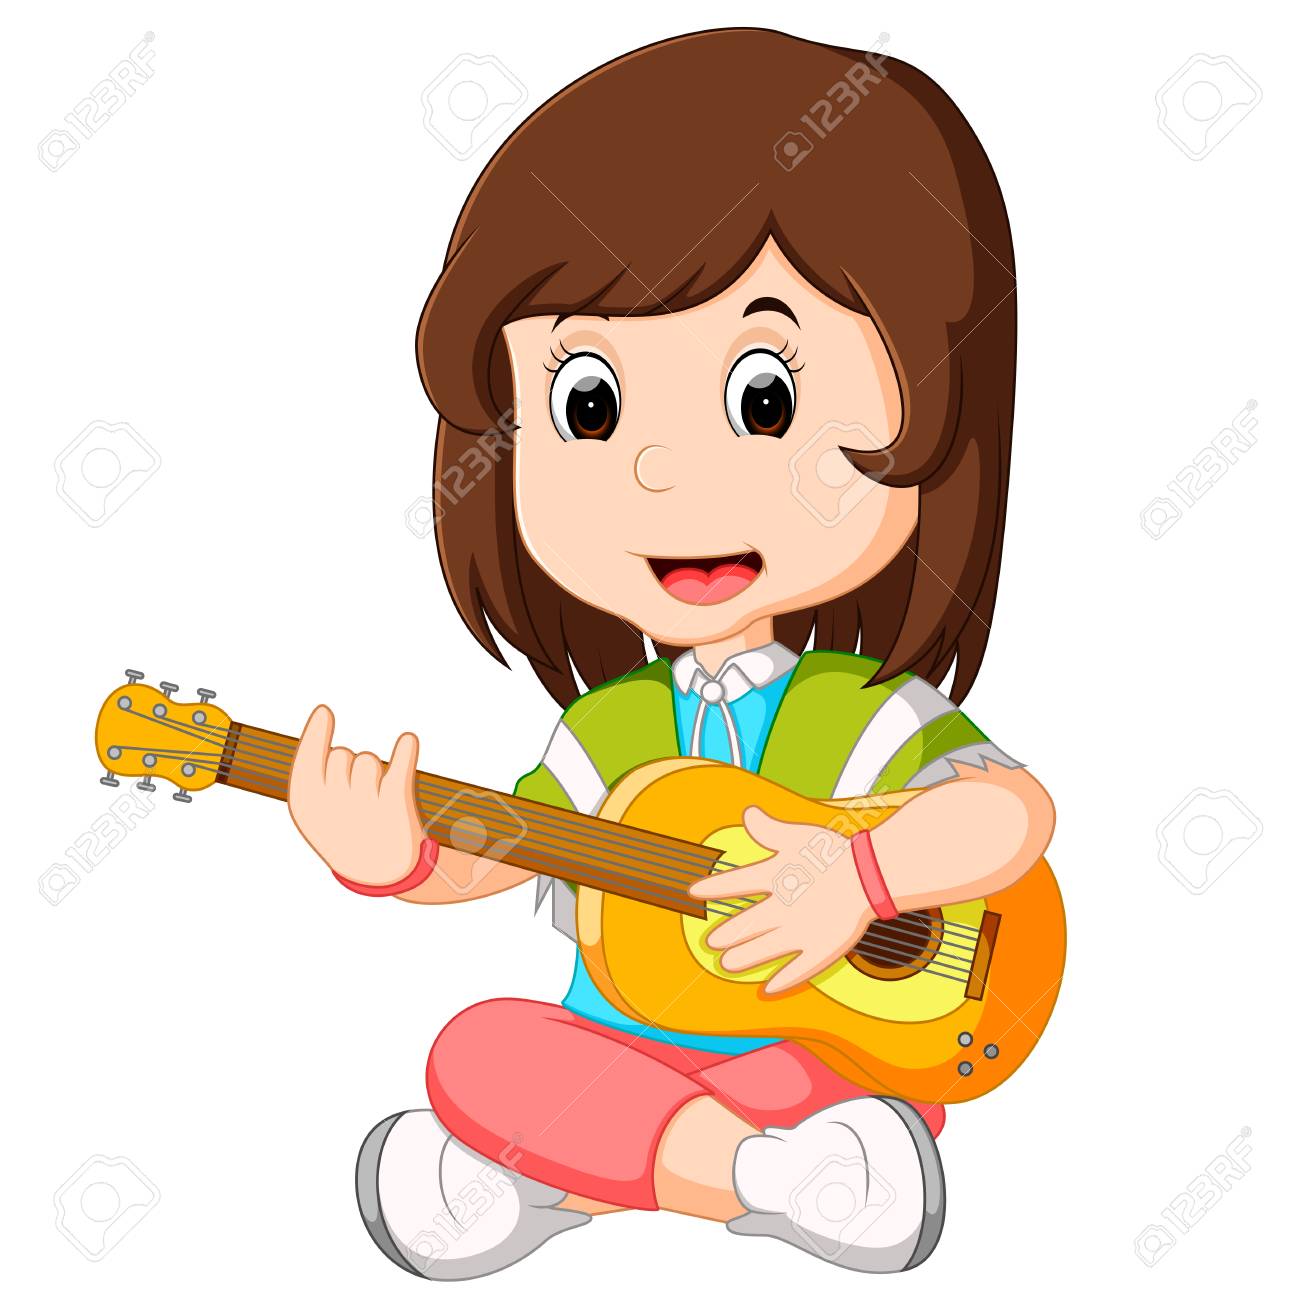 Girl playing guitar clipart